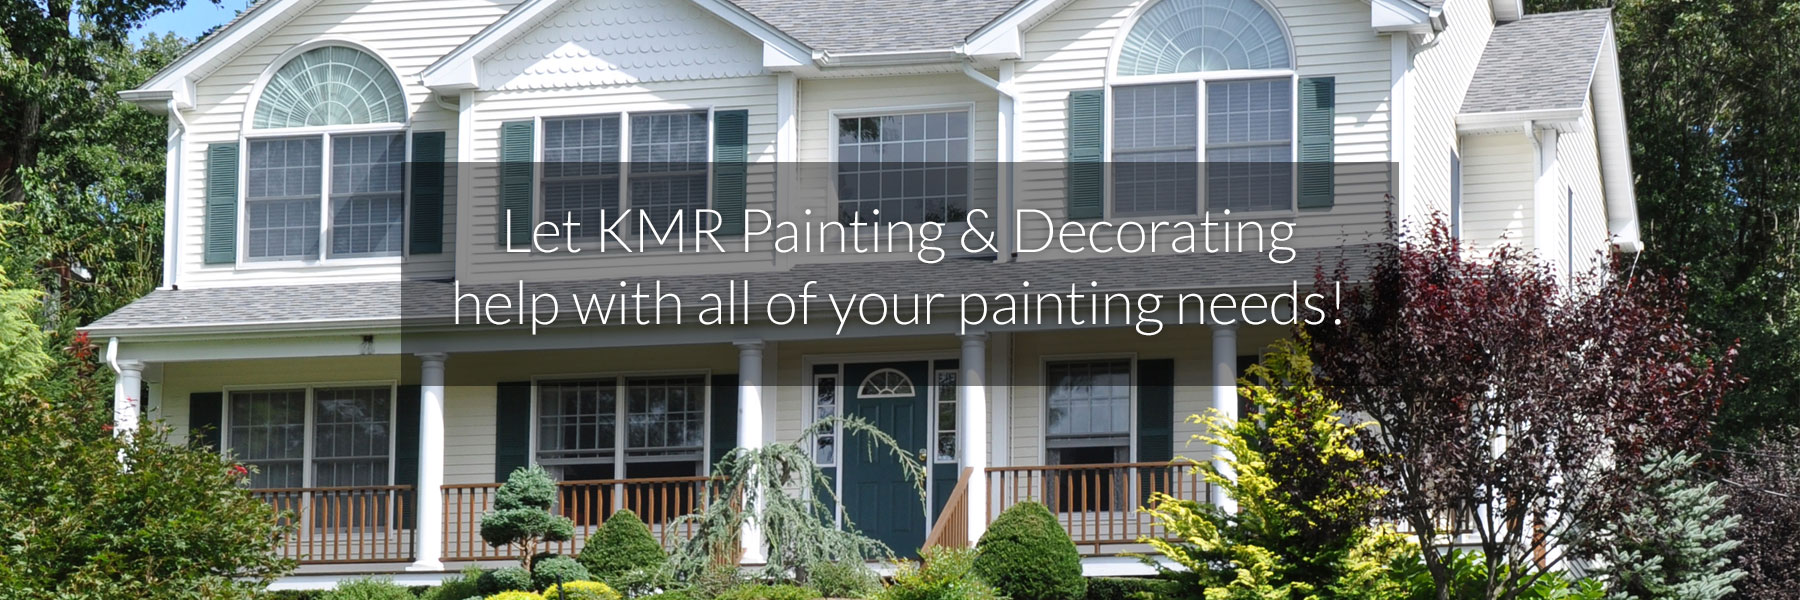 KMR Painting & Decorating, Painters in Long Island, Huntington New York